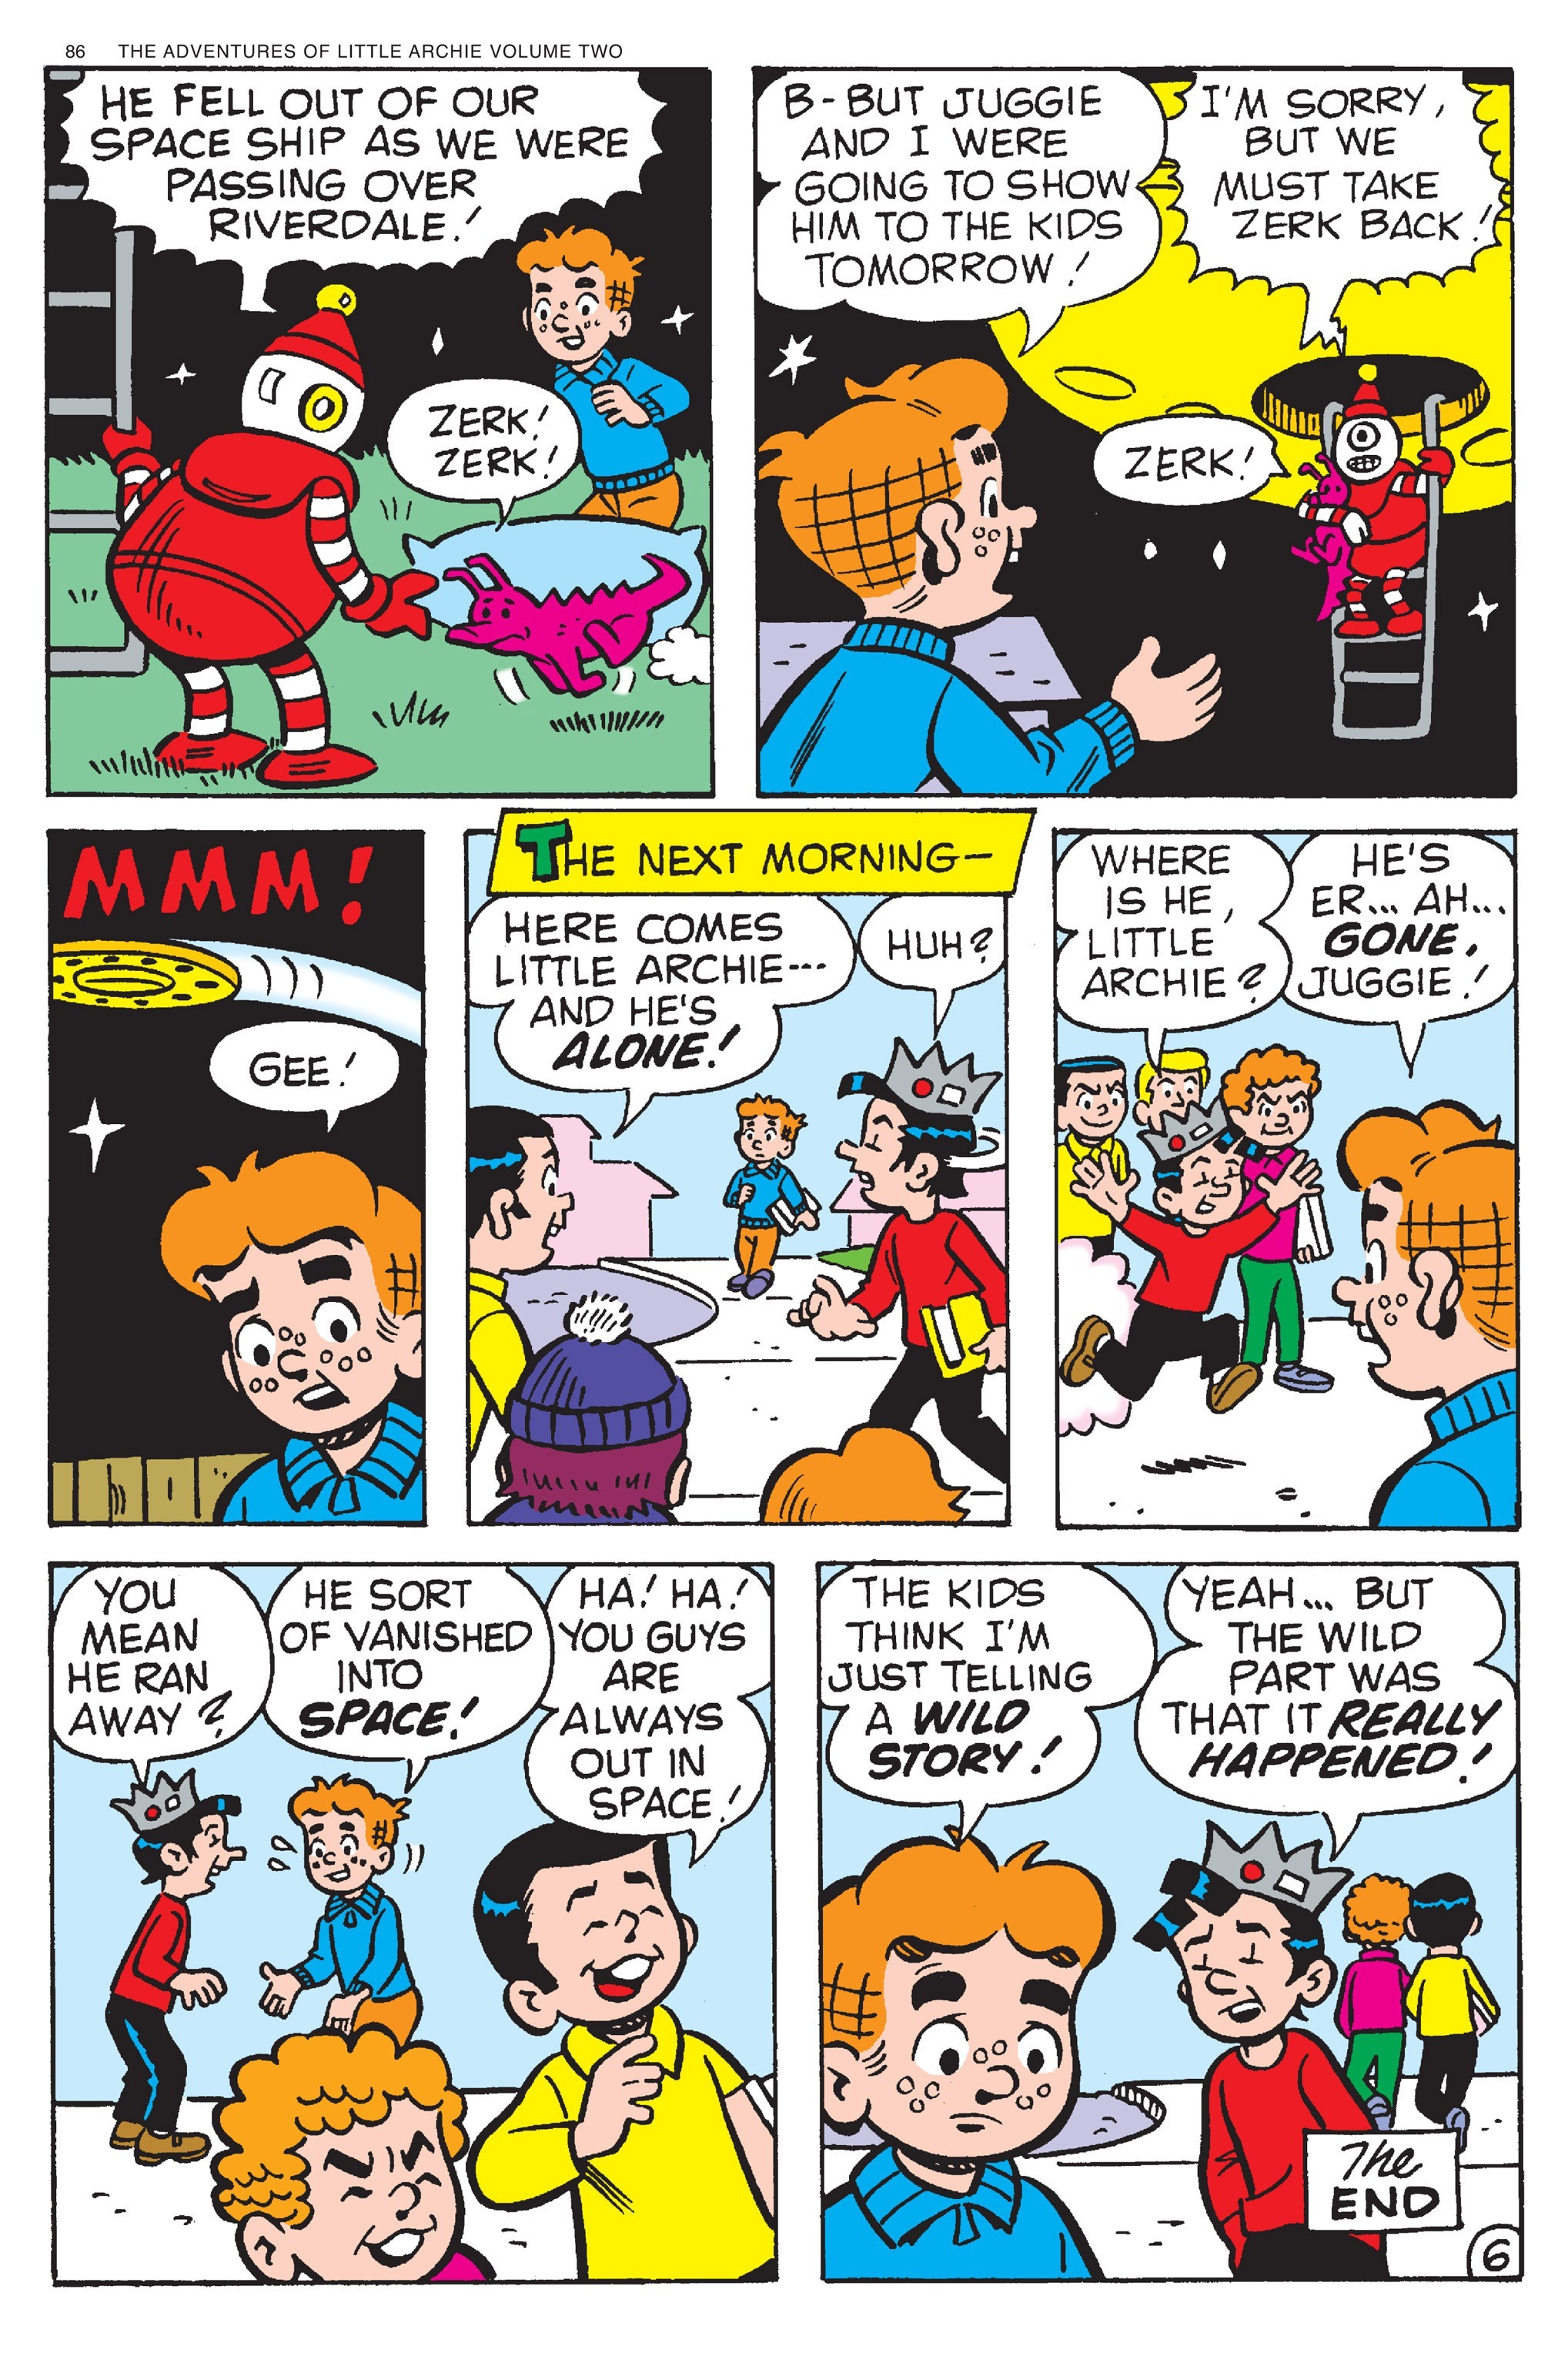 Read online Adventures of Little Archie comic -  Issue # TPB 2 - 87